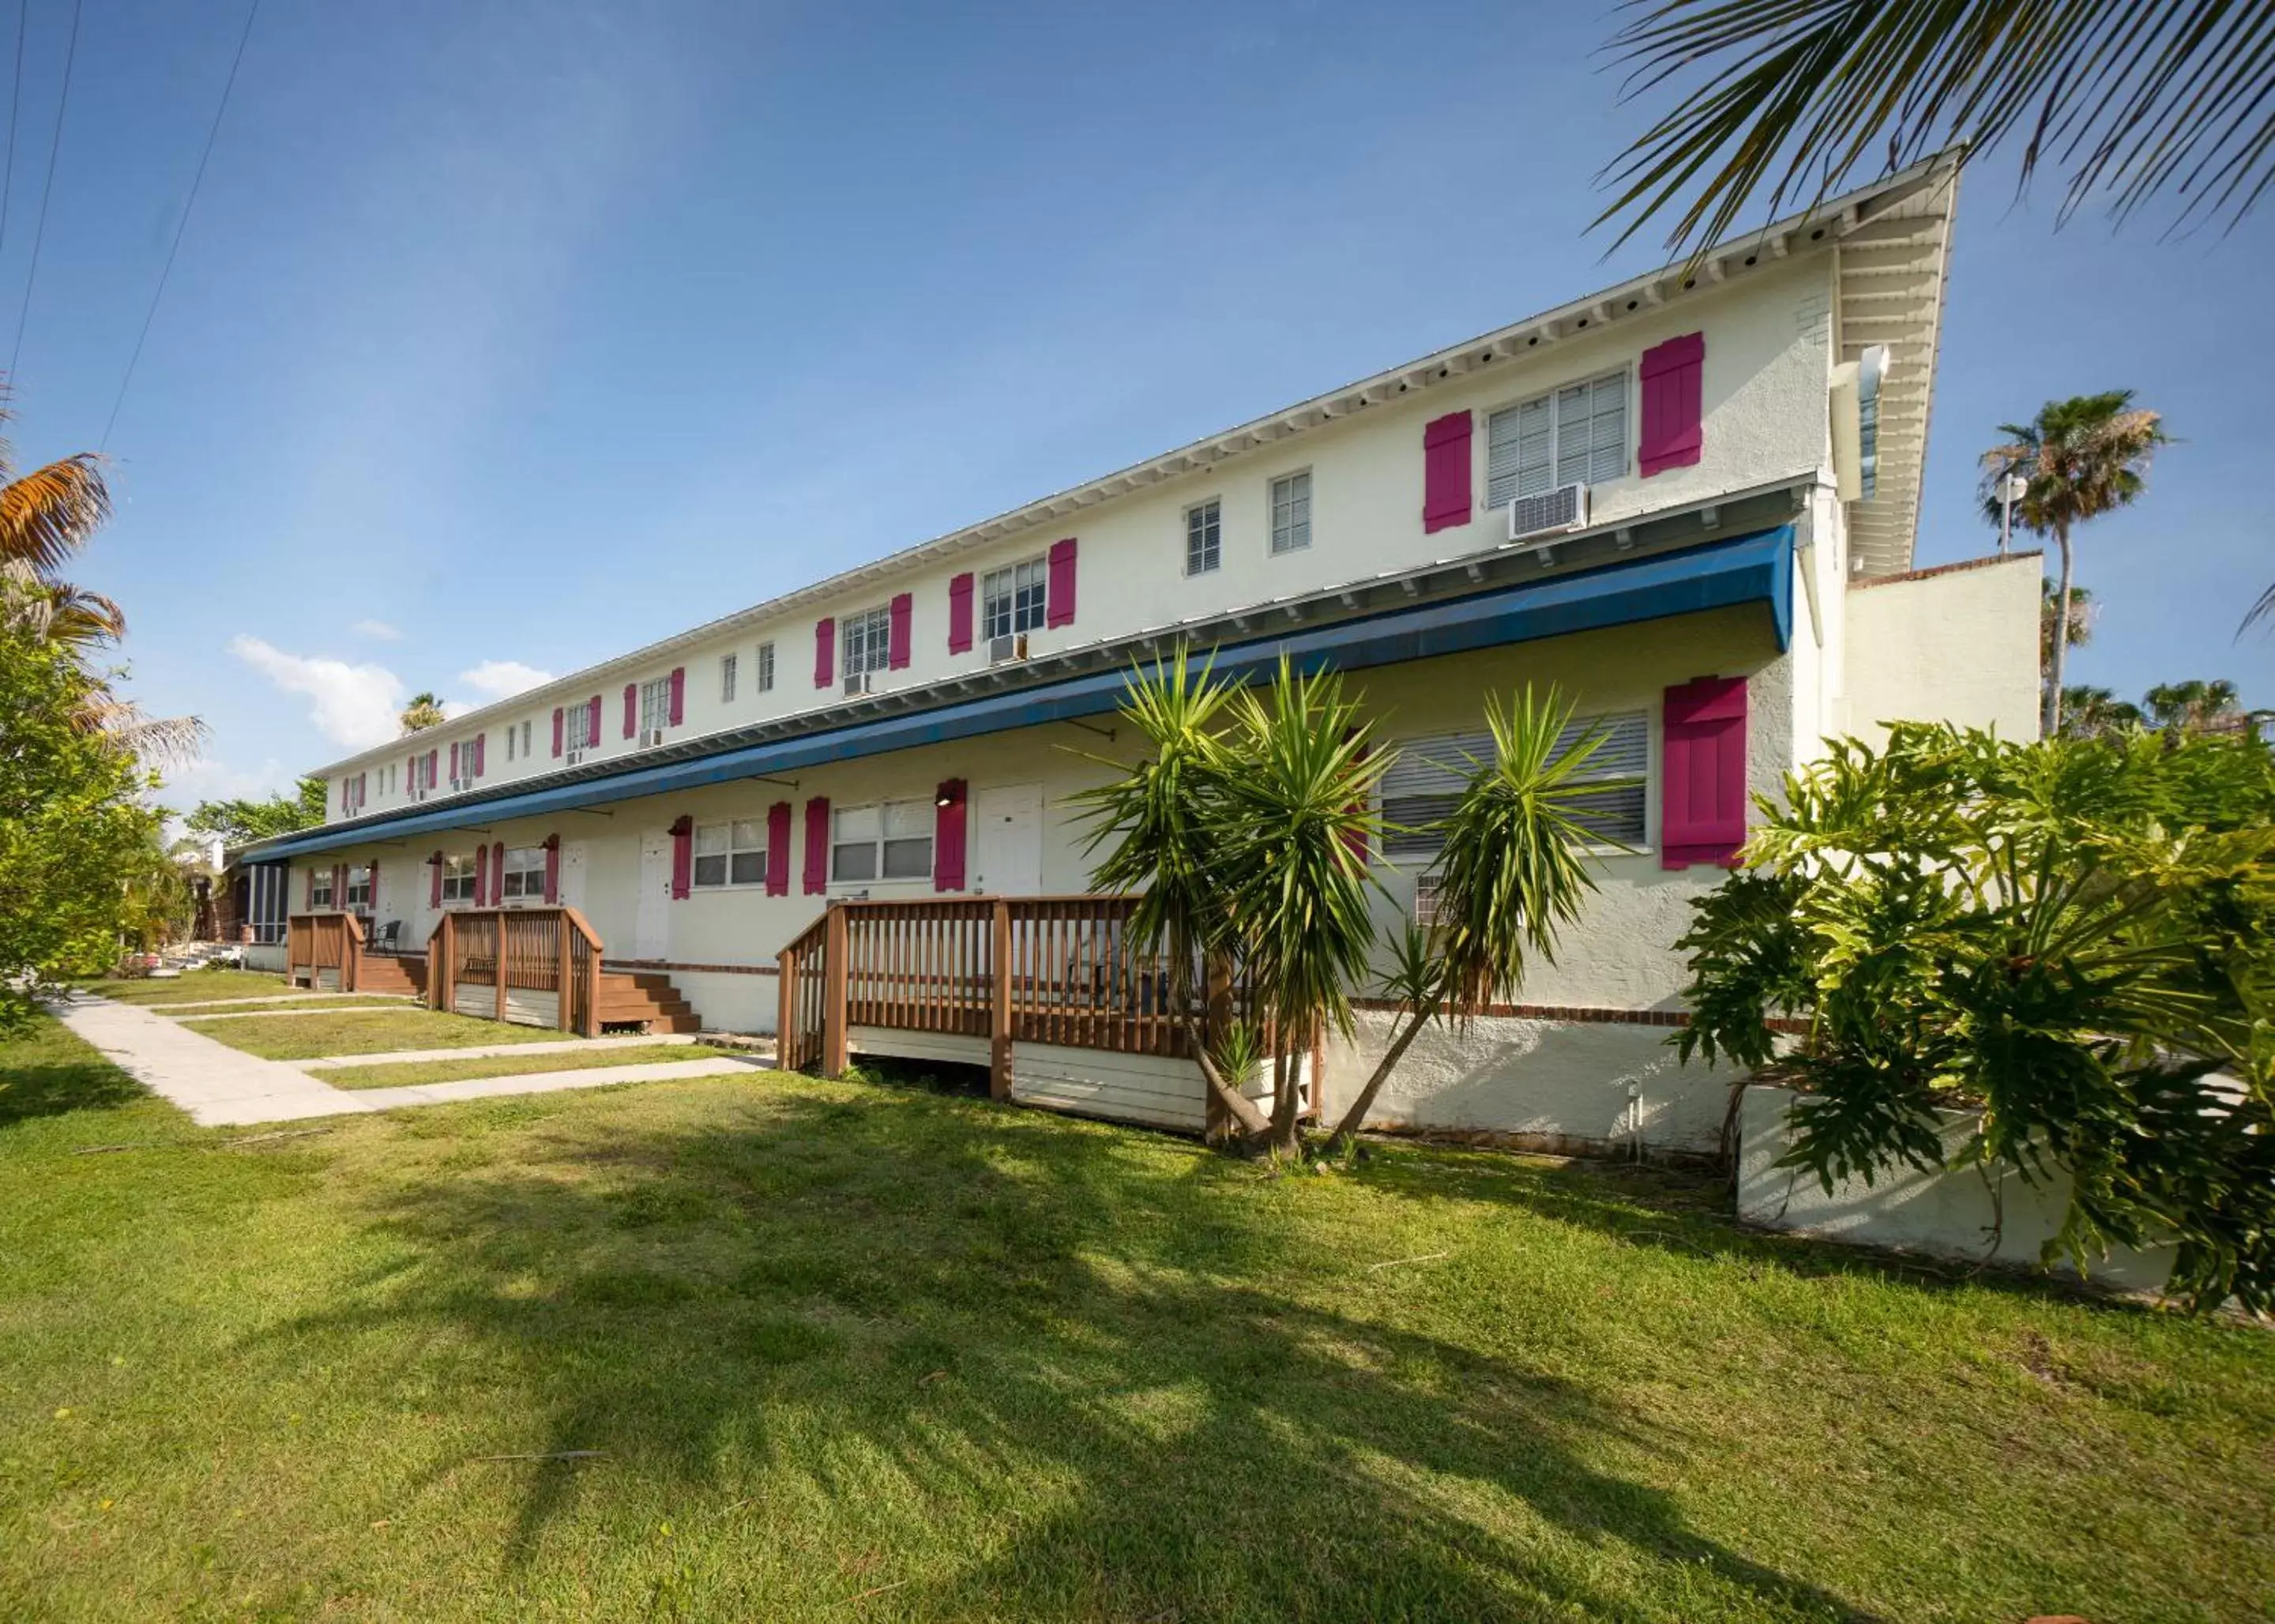 Property Building in Captain's Table Hotel by Everglades Adventures